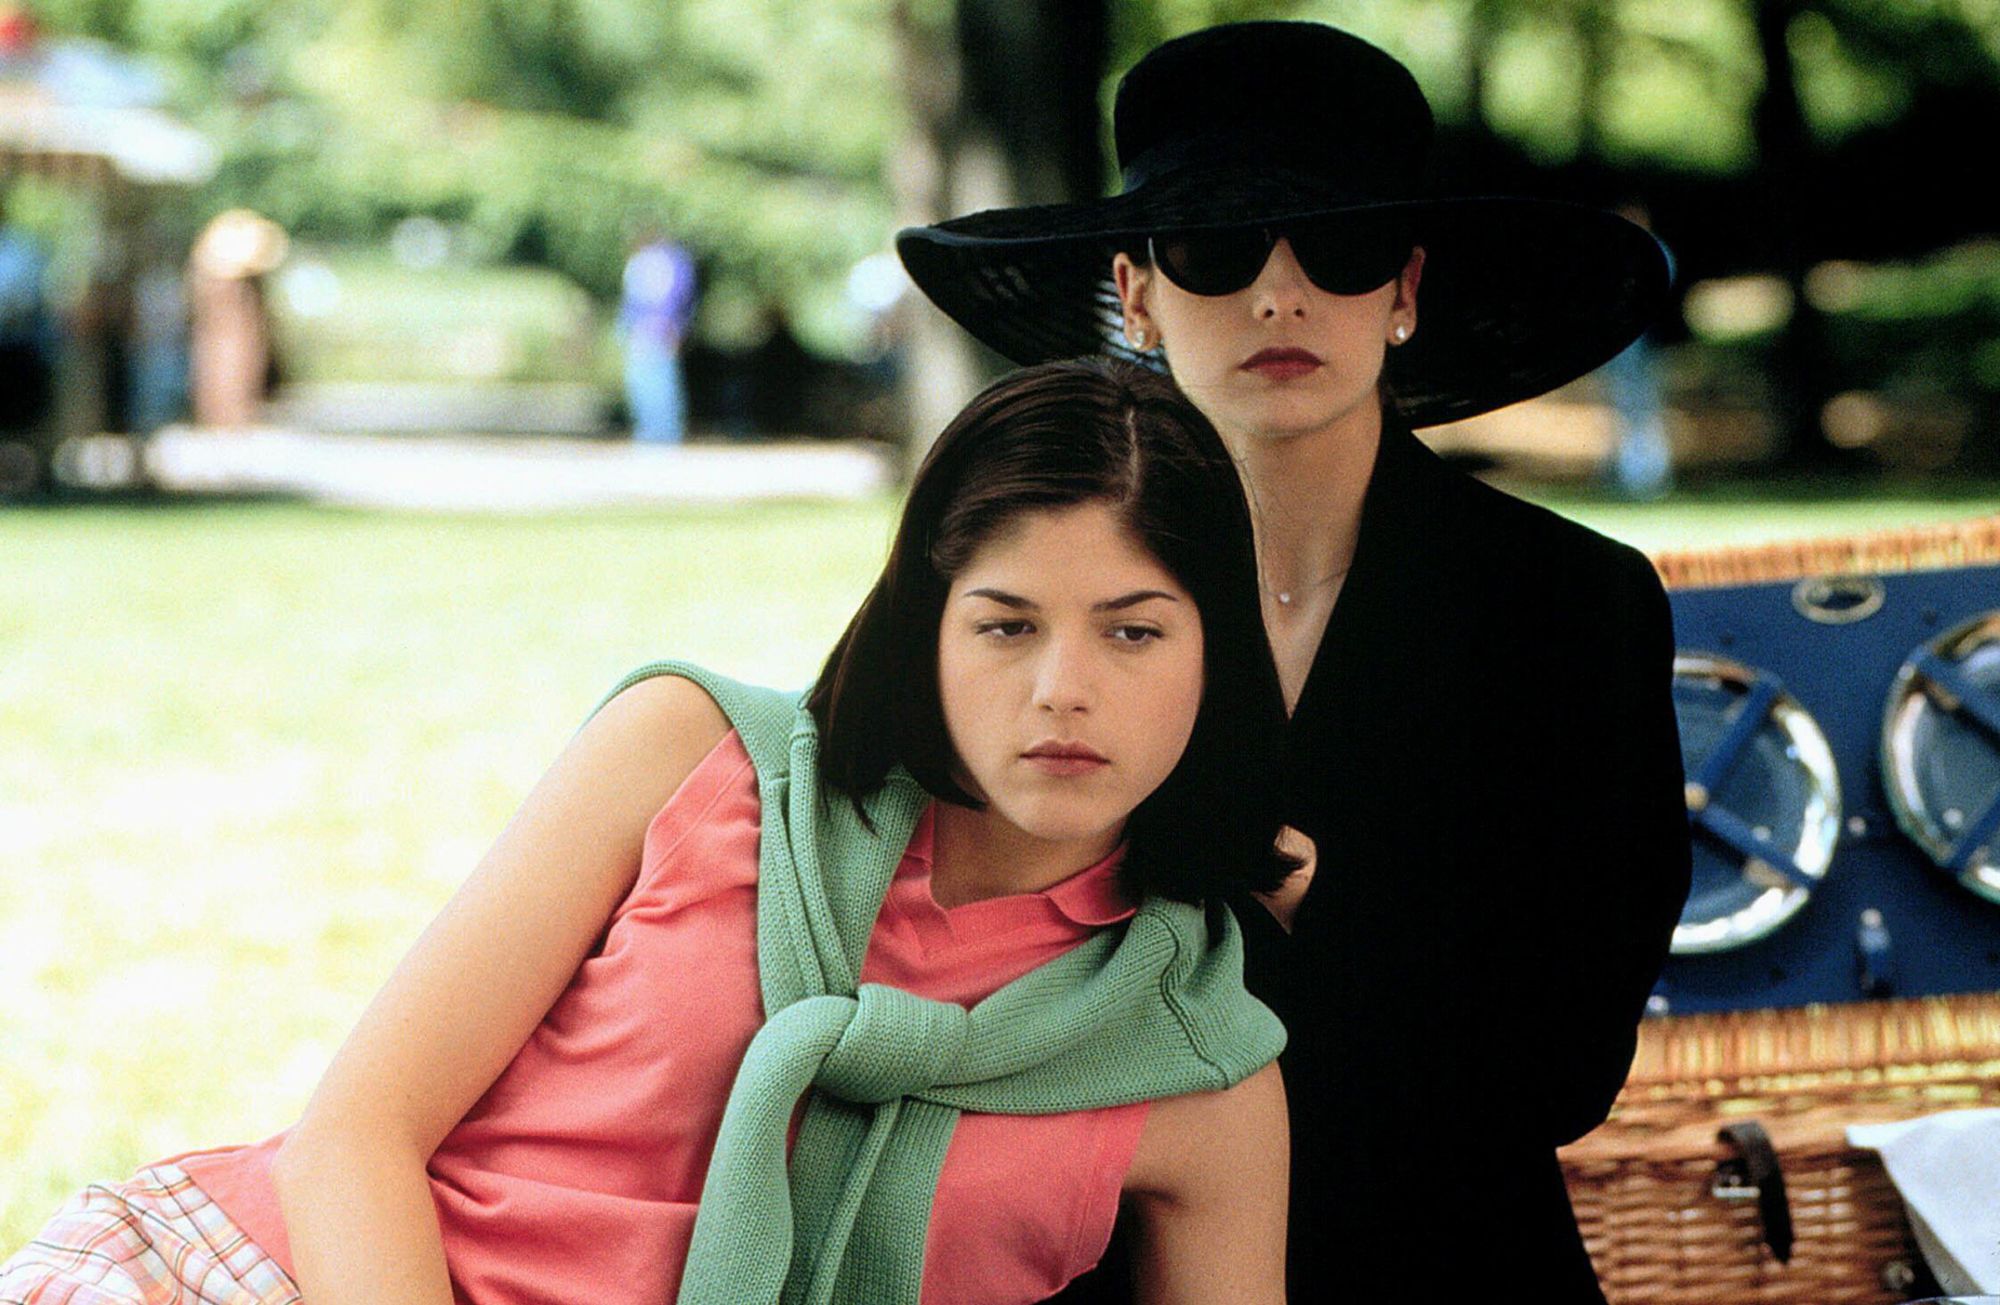 Why 'Cruel Intentions' still inspires, 25 years on